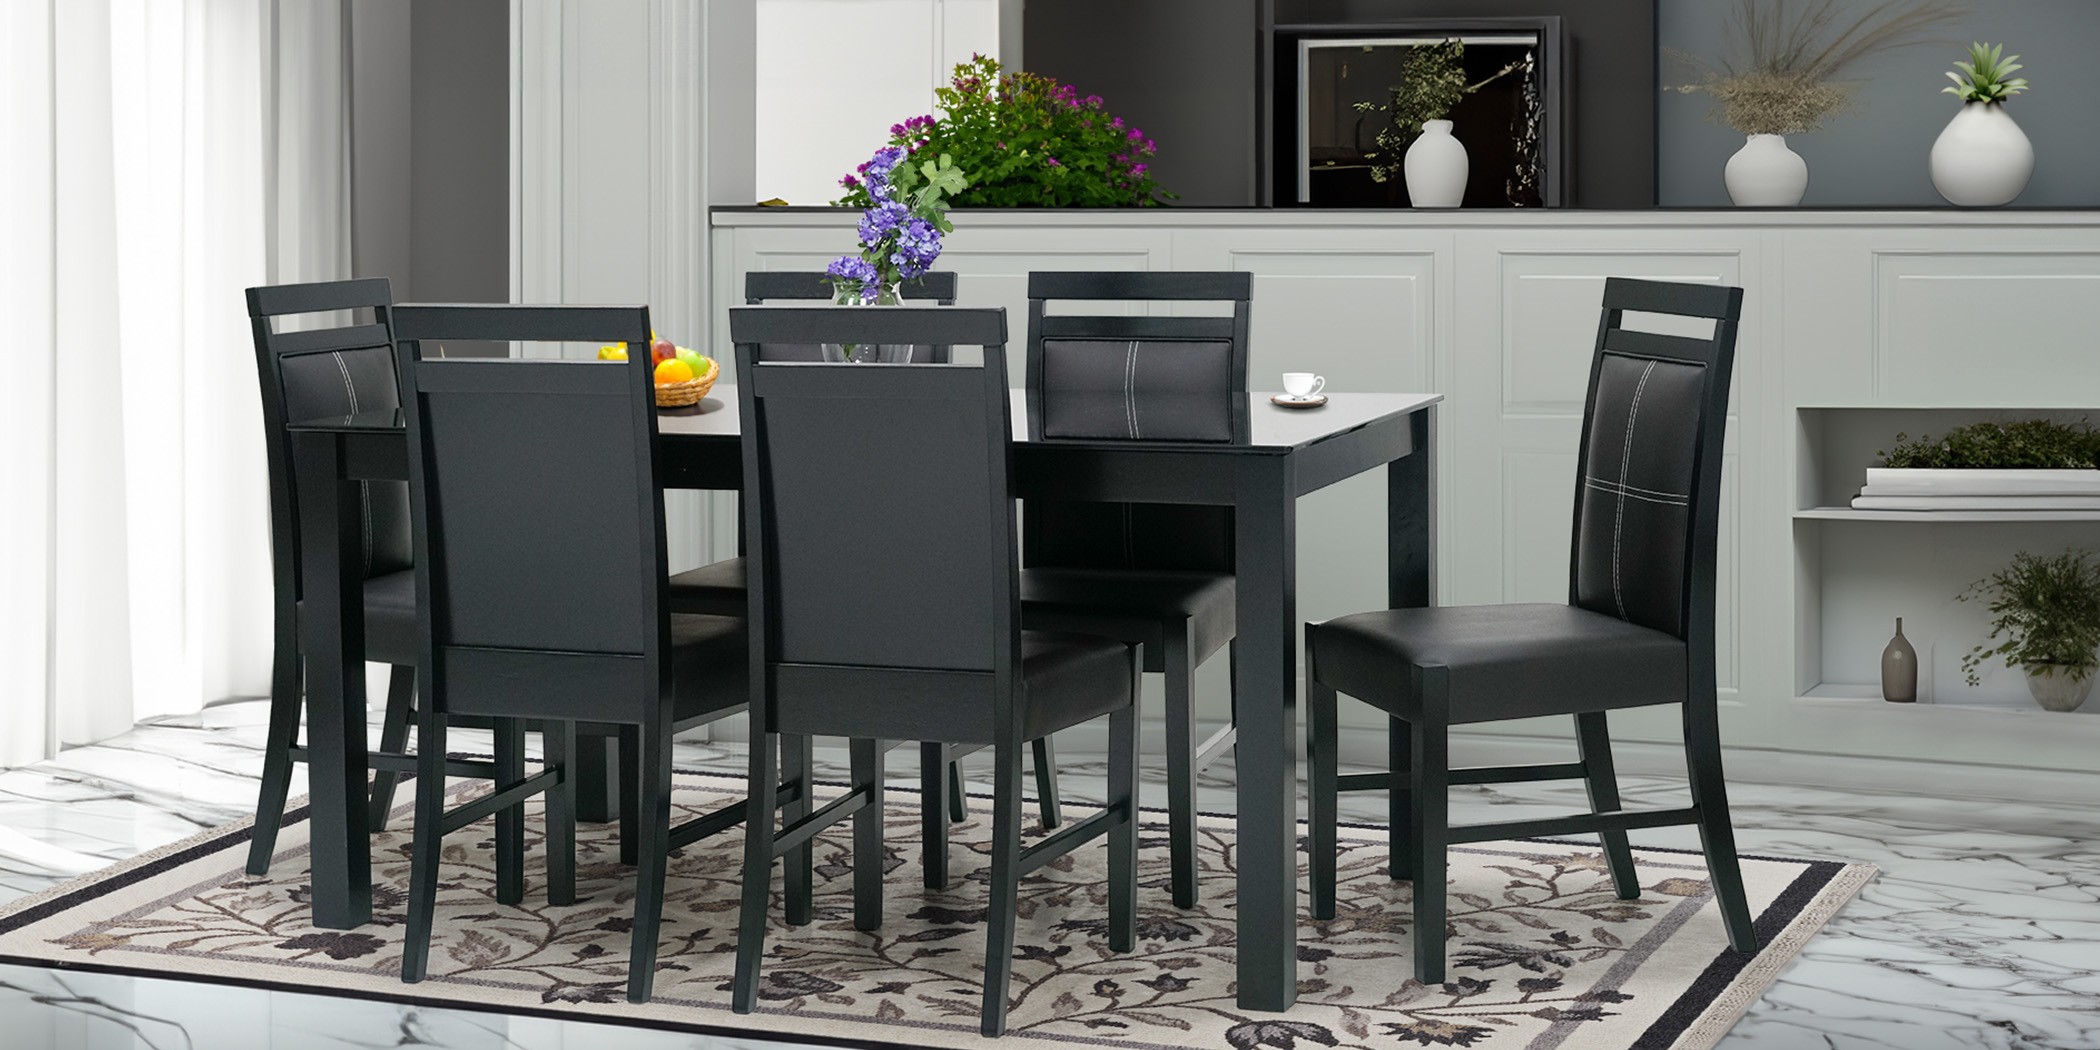 Gessica Table and 6 Chairs